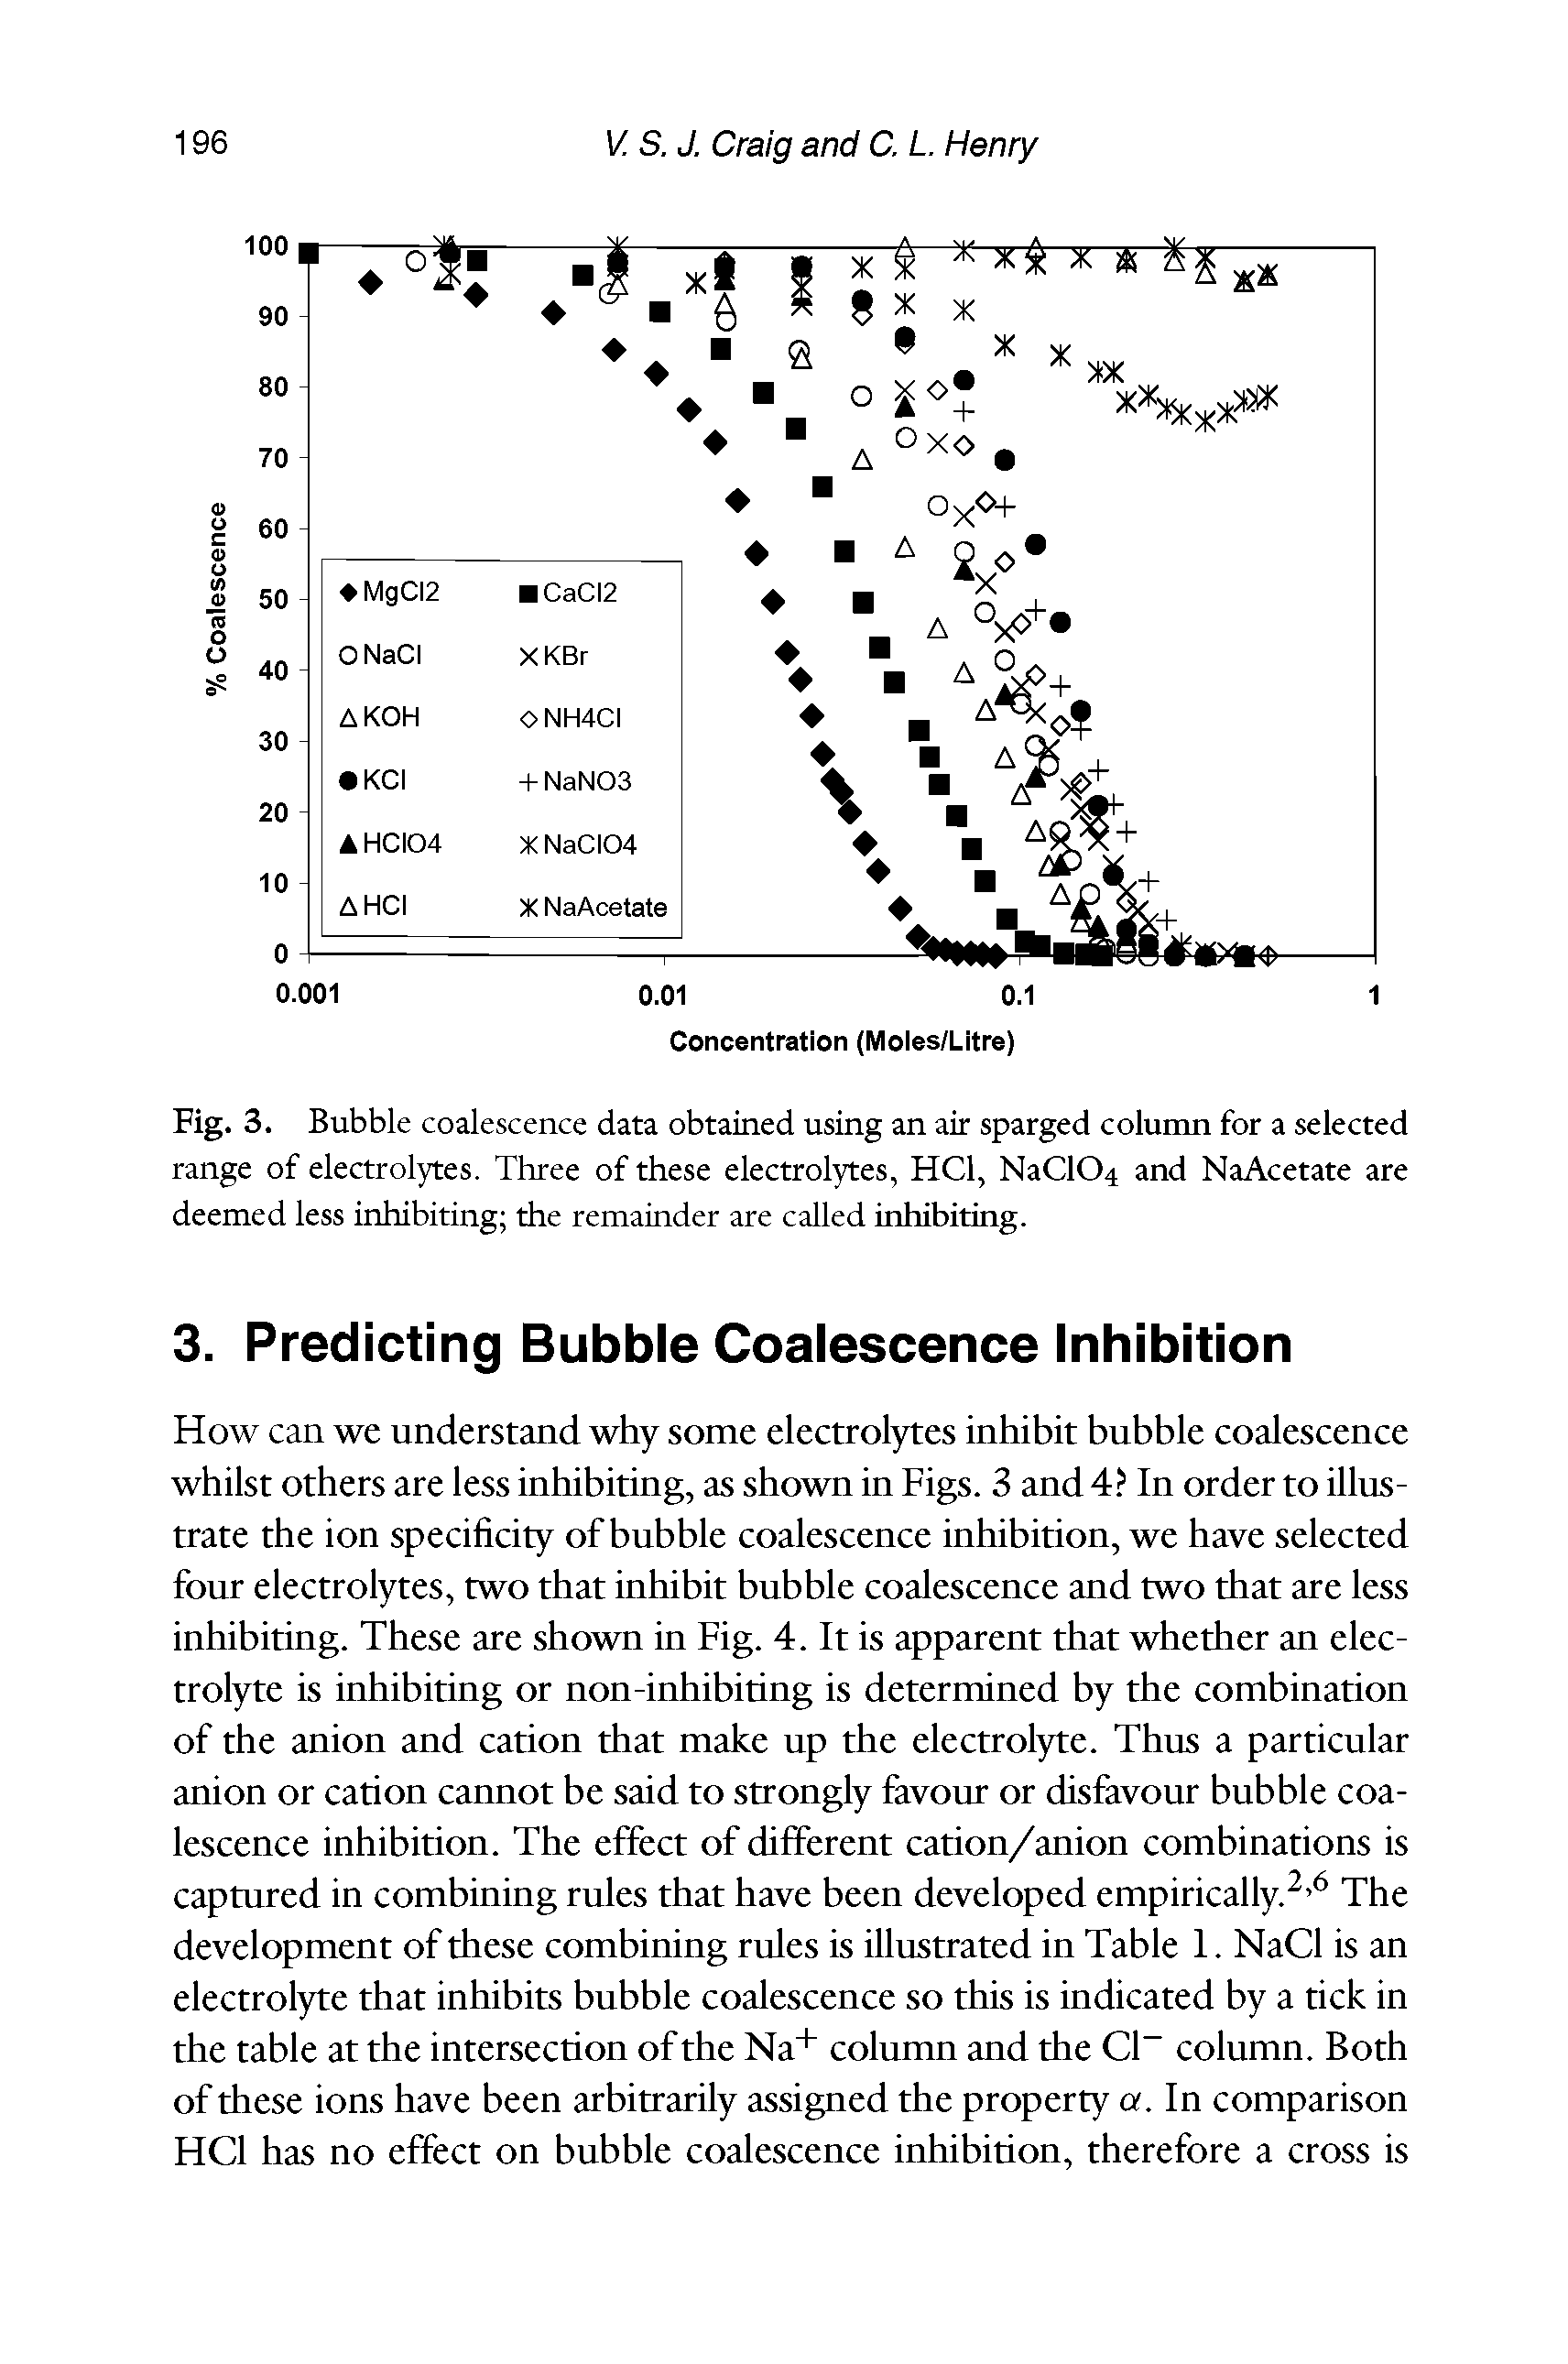 Fig. 3. Bubble coalescence data obtained using an air sparged column for a selected range of electrolytes. Three of these electrolytes, HCl, NaClO and NaAcetate are deemed less inhibiting the remainder are called inhibiting.